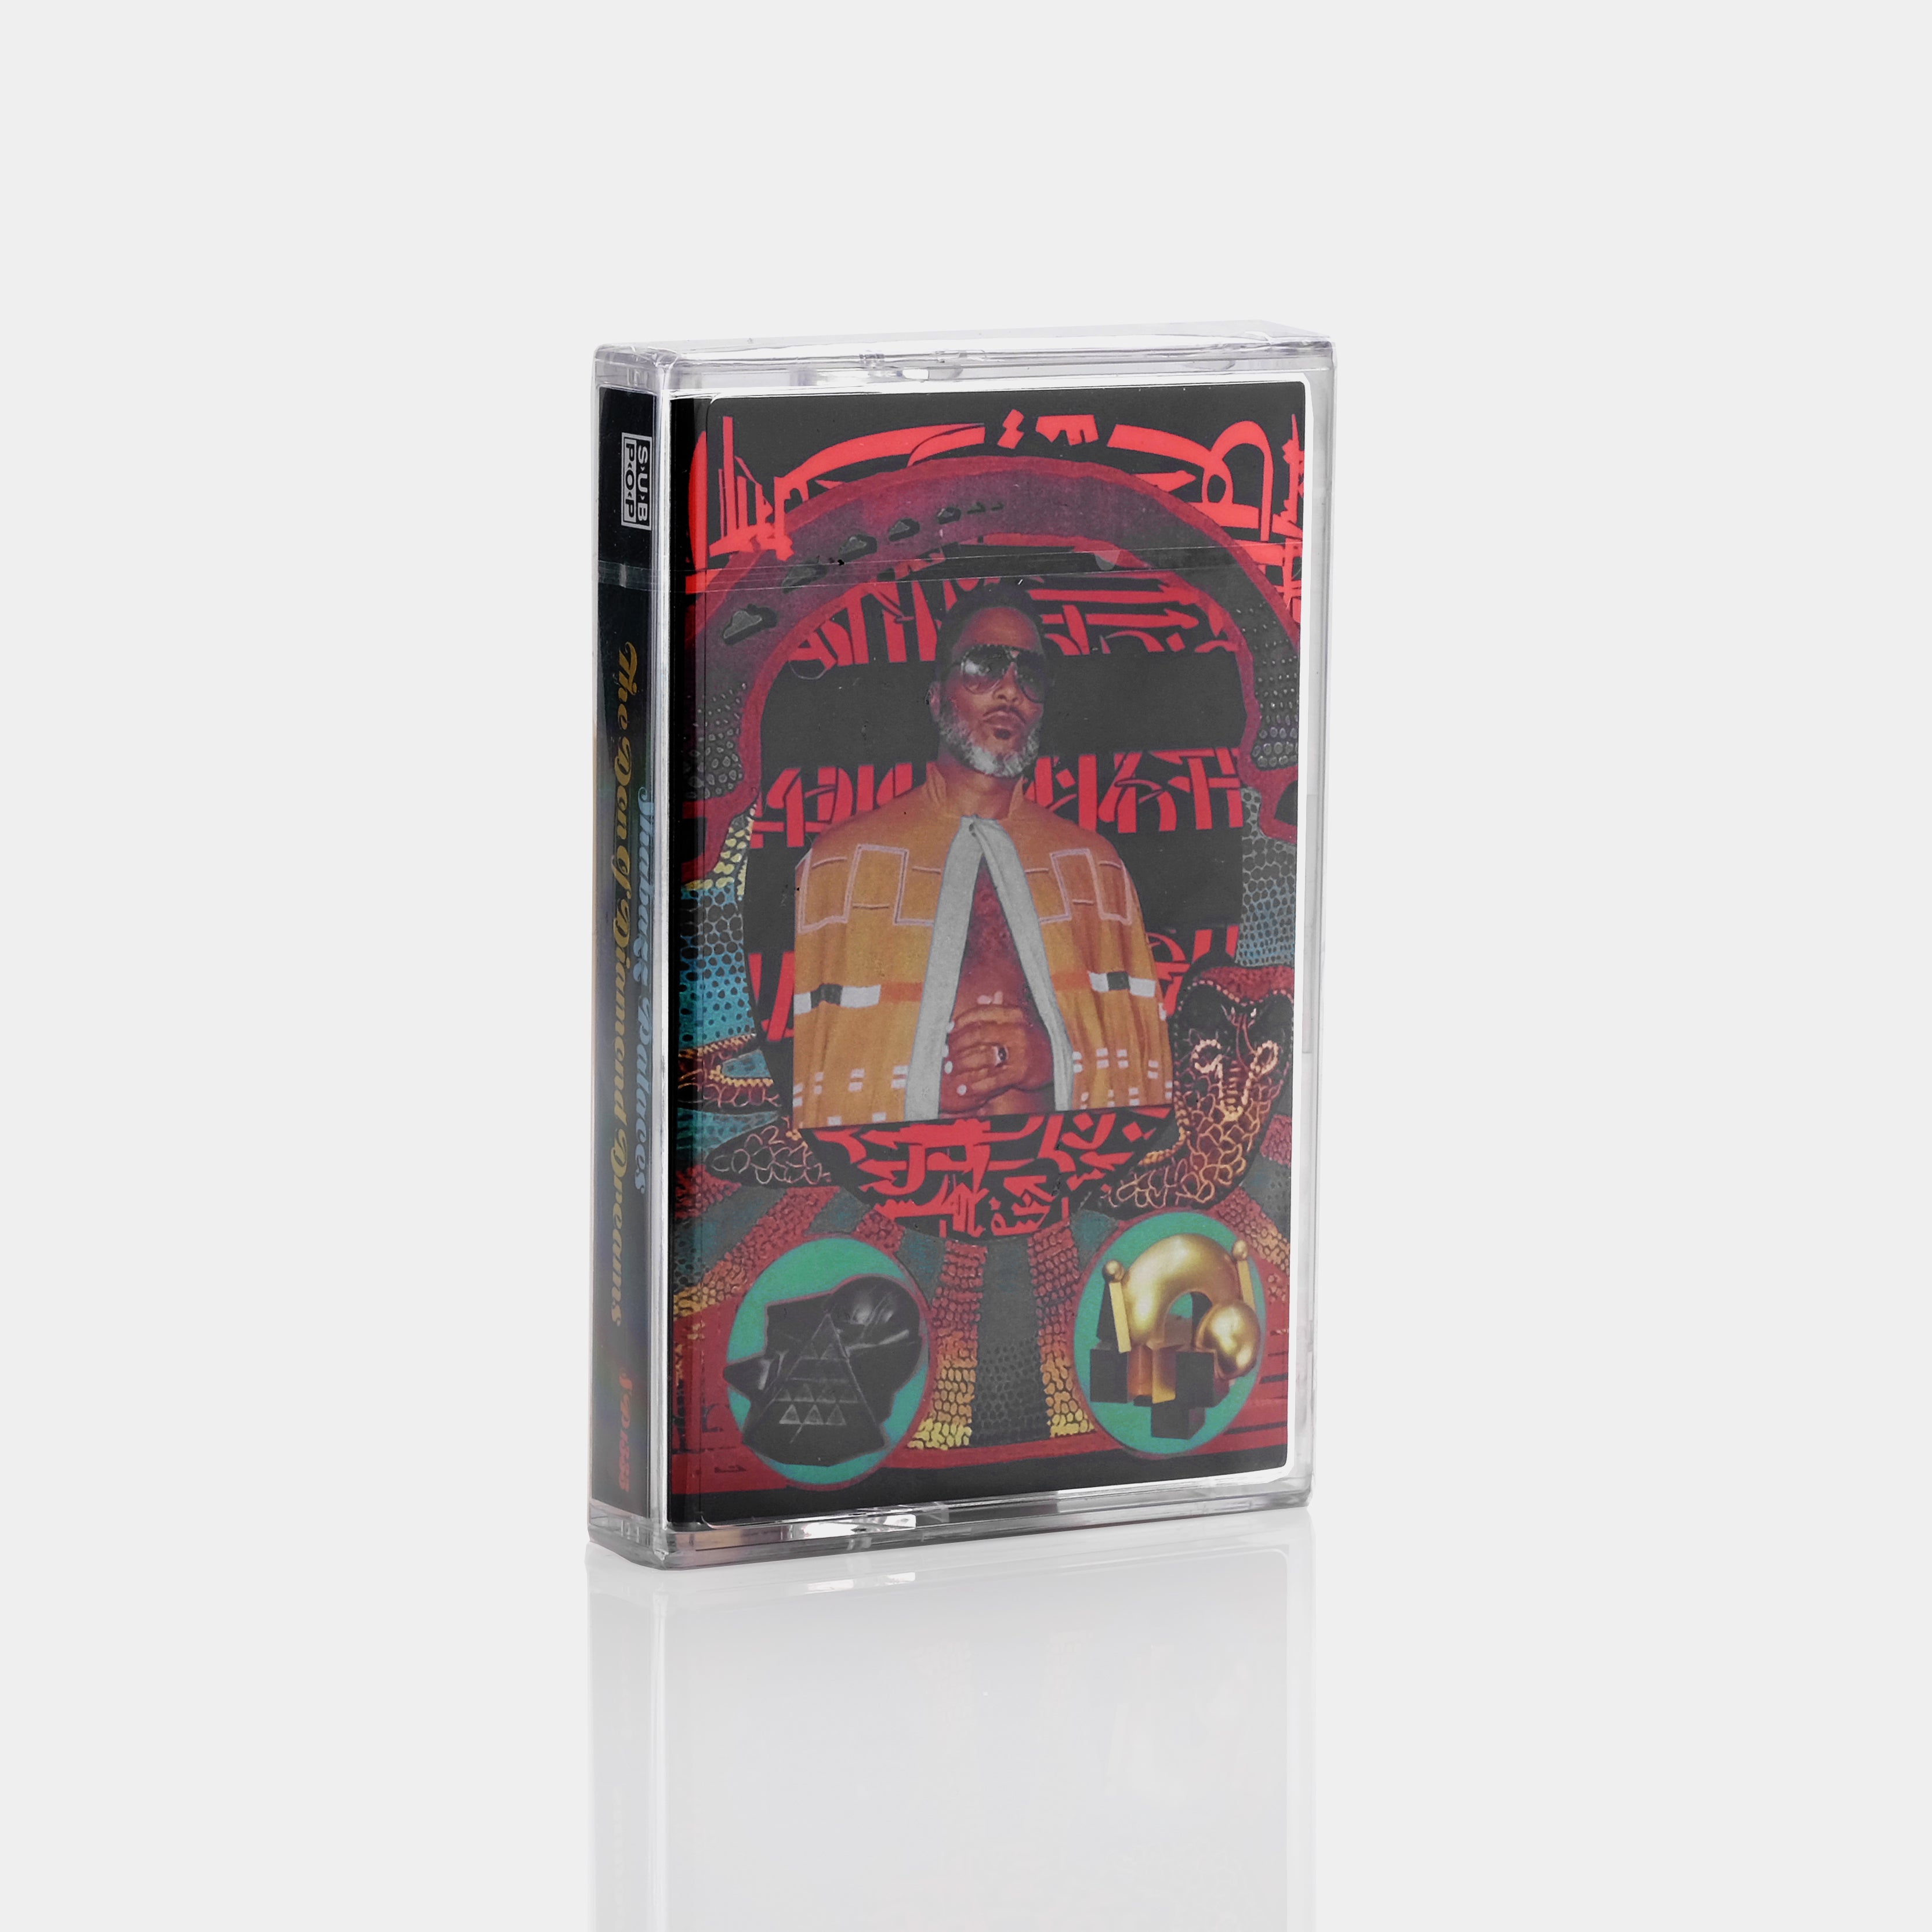 Shabazz Palaces - The Don Of Diamond Dreams Cassette Tape